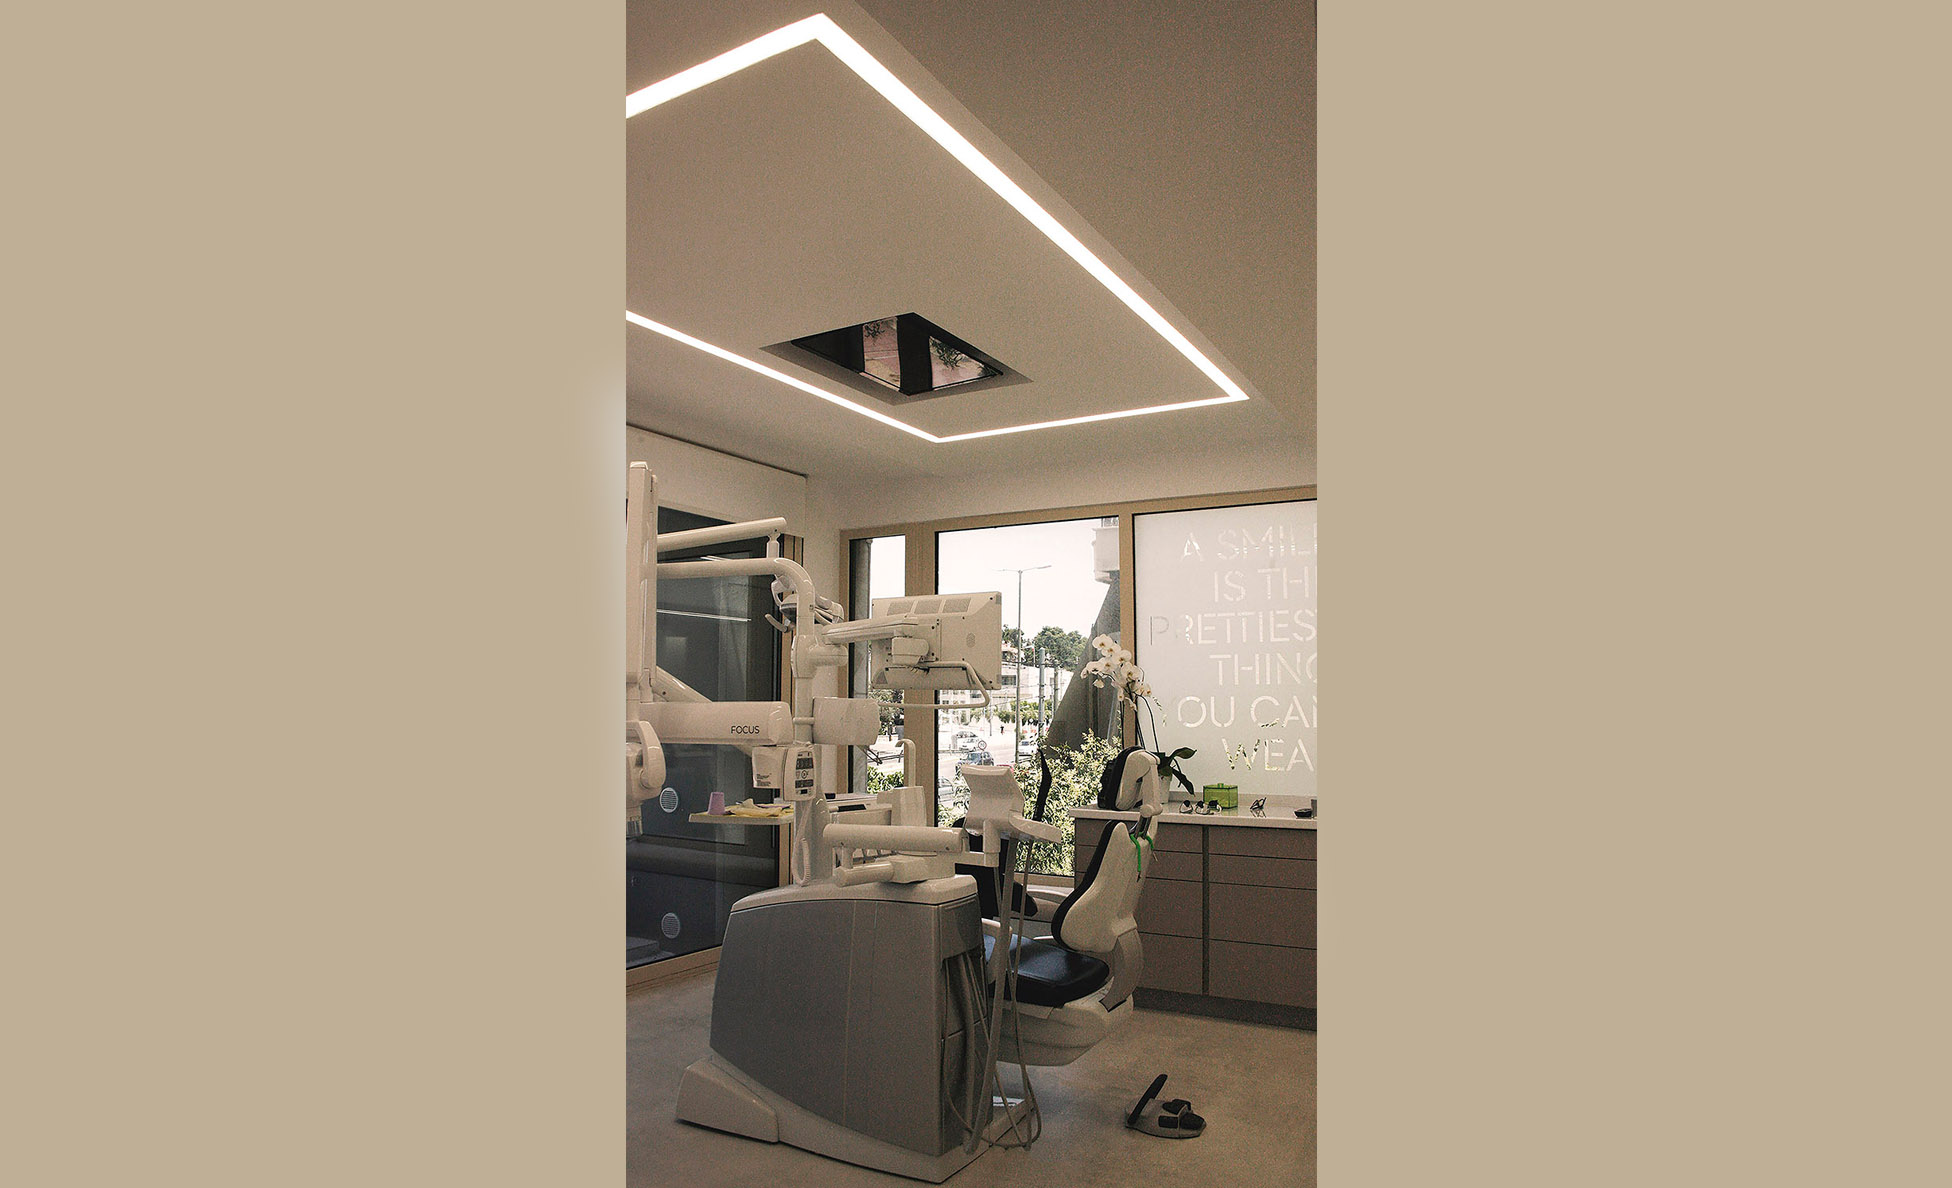 Deciduous Dental Clinic in Athens